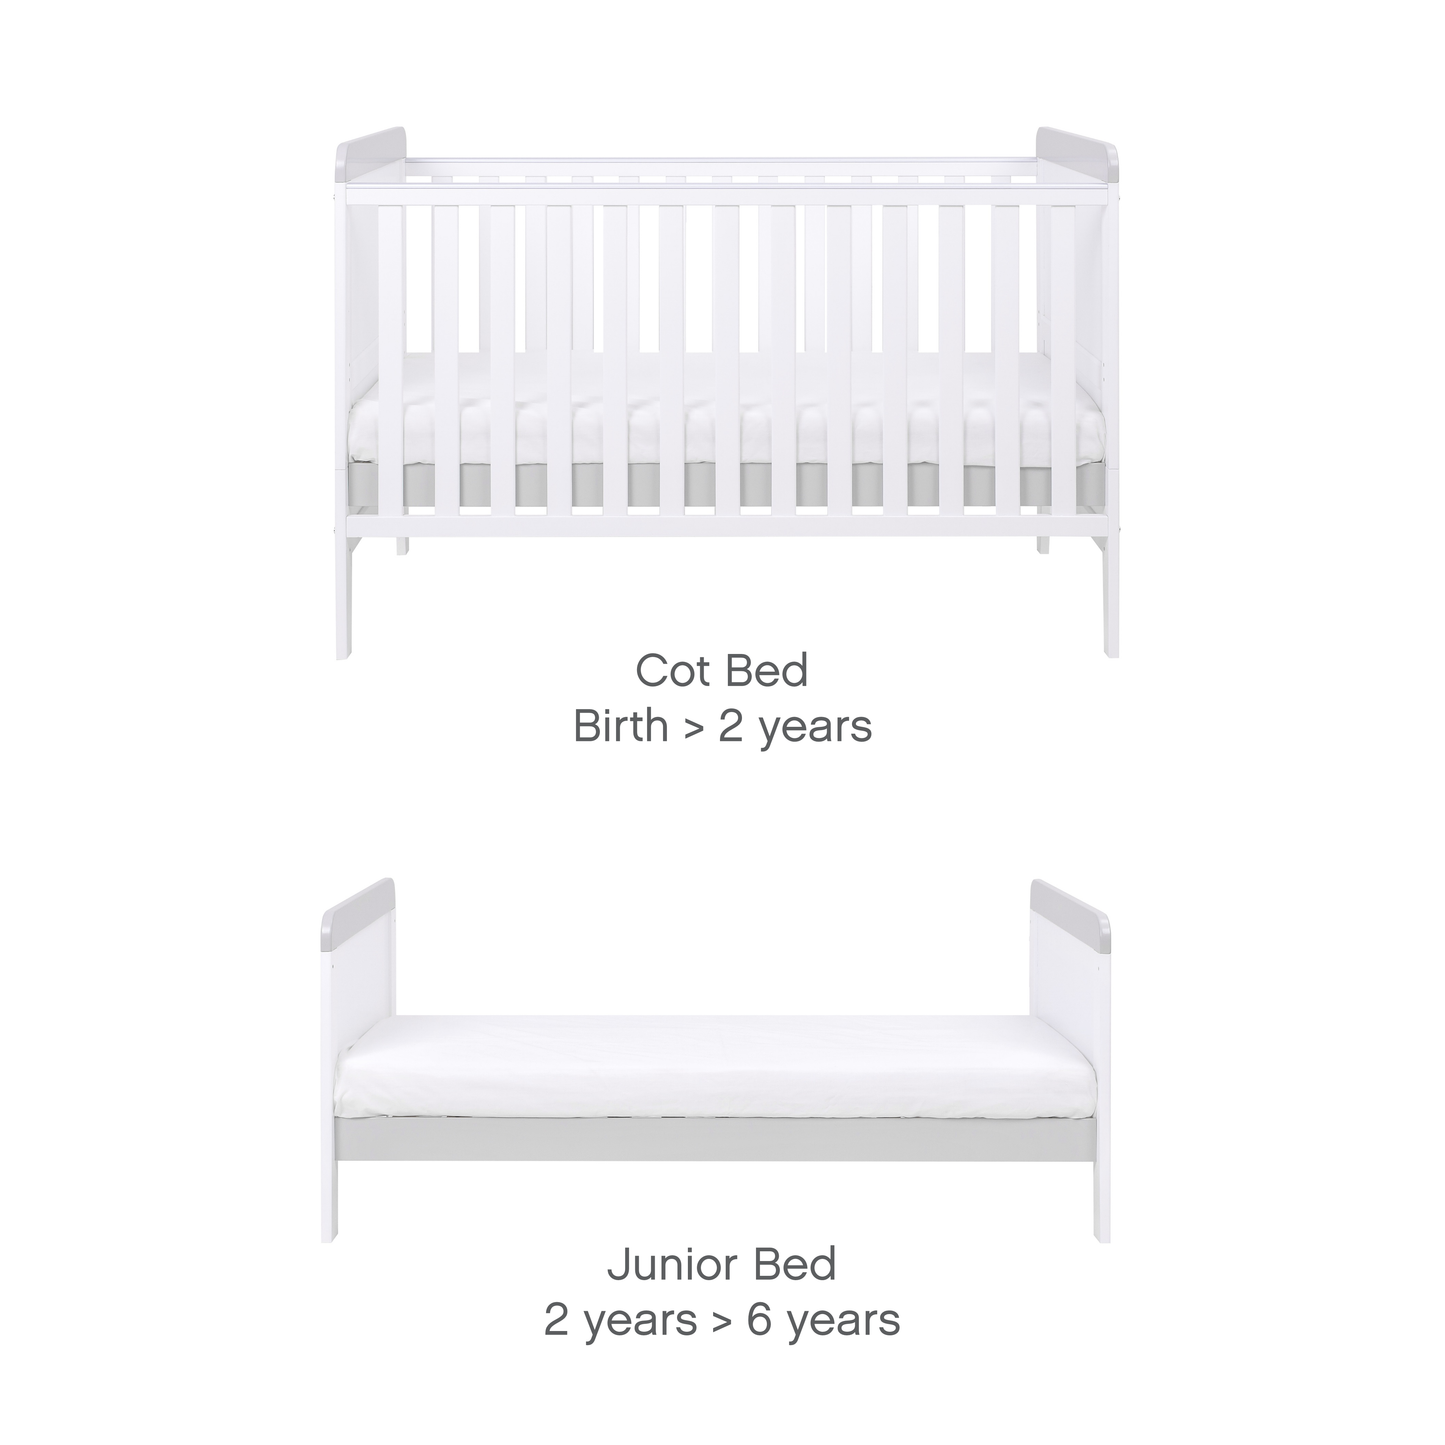 Tutti Bambini Rio 3 Piece Range with Cot Bed, Dresser Changer and Wardrobe